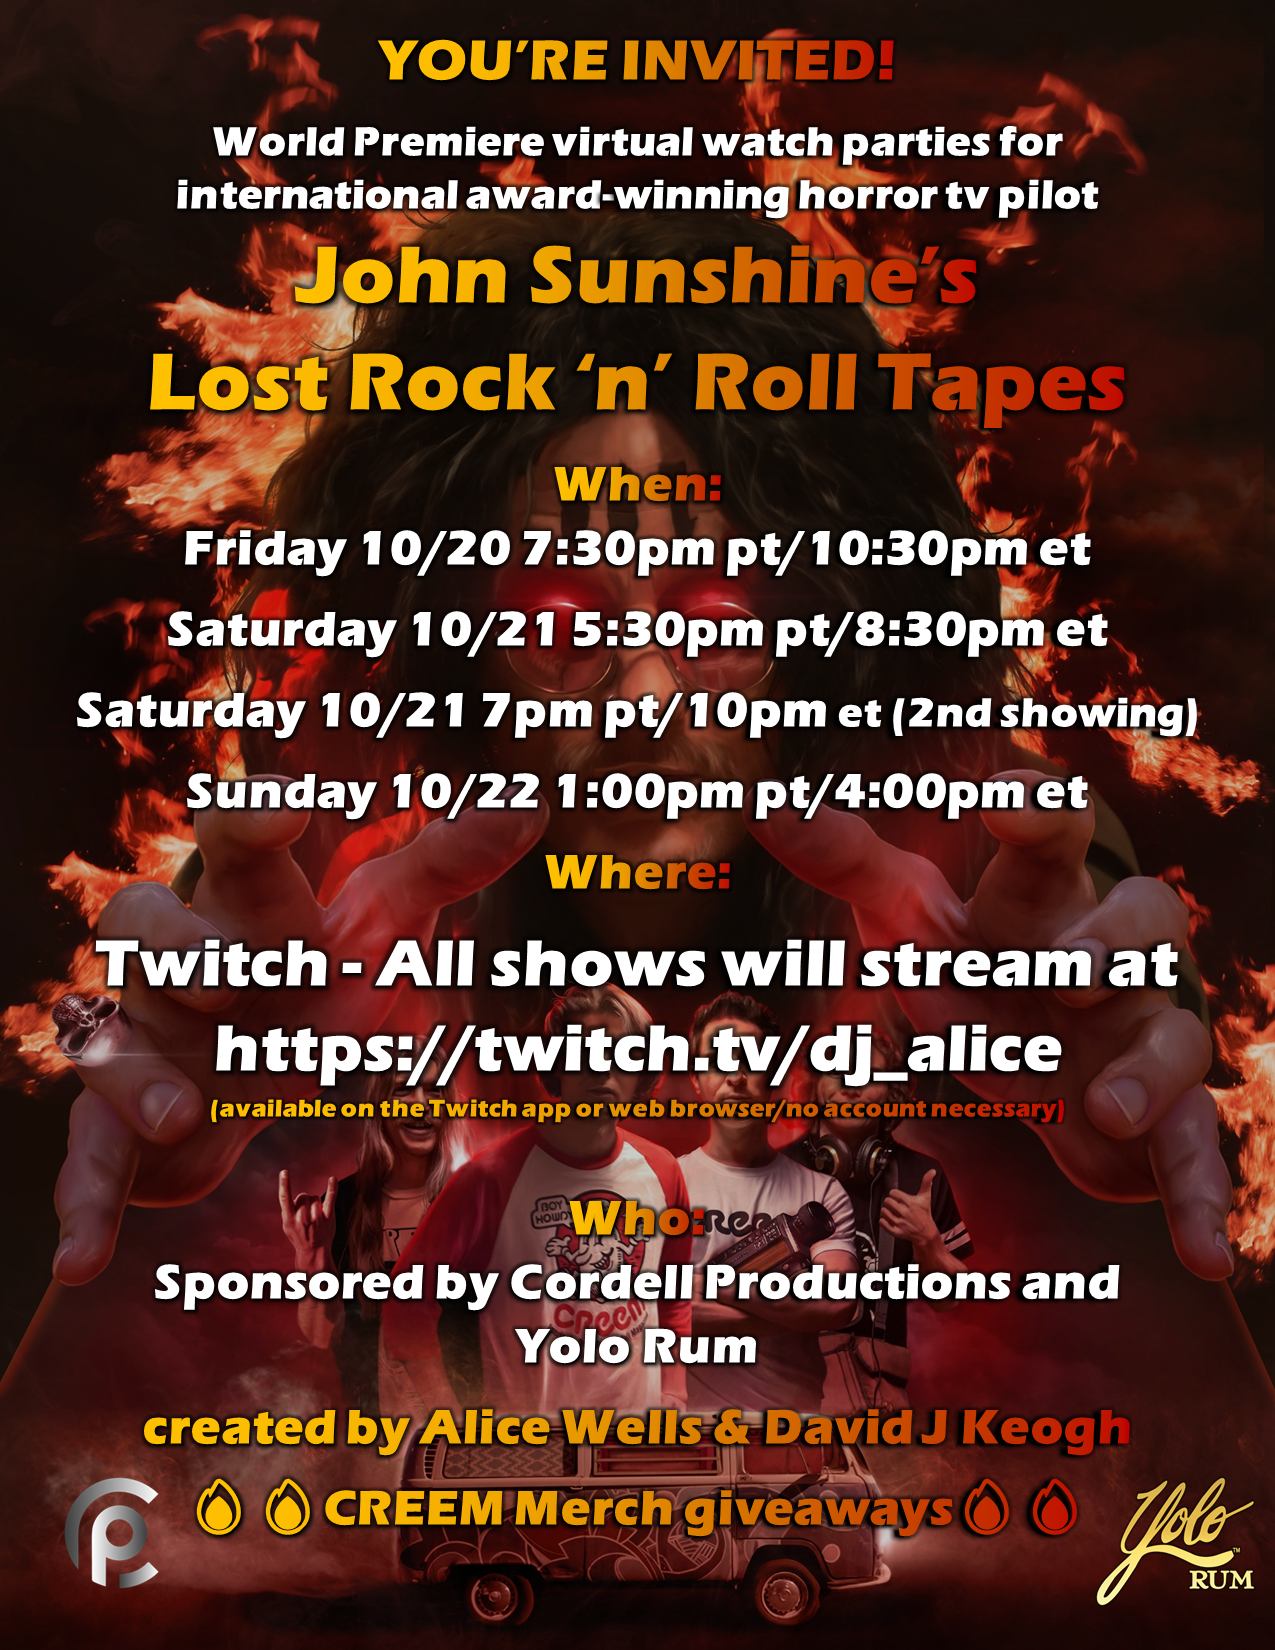 YOU'RE INVITED to the world premiere watch party of the horror tv pilot, John Sunshine’s Lost Rock 'n' Roll Tapes, an international award-winning boldly dark comedic horror/supernatural rock-mock series set in the 1970s and present day Pacific Northwest.